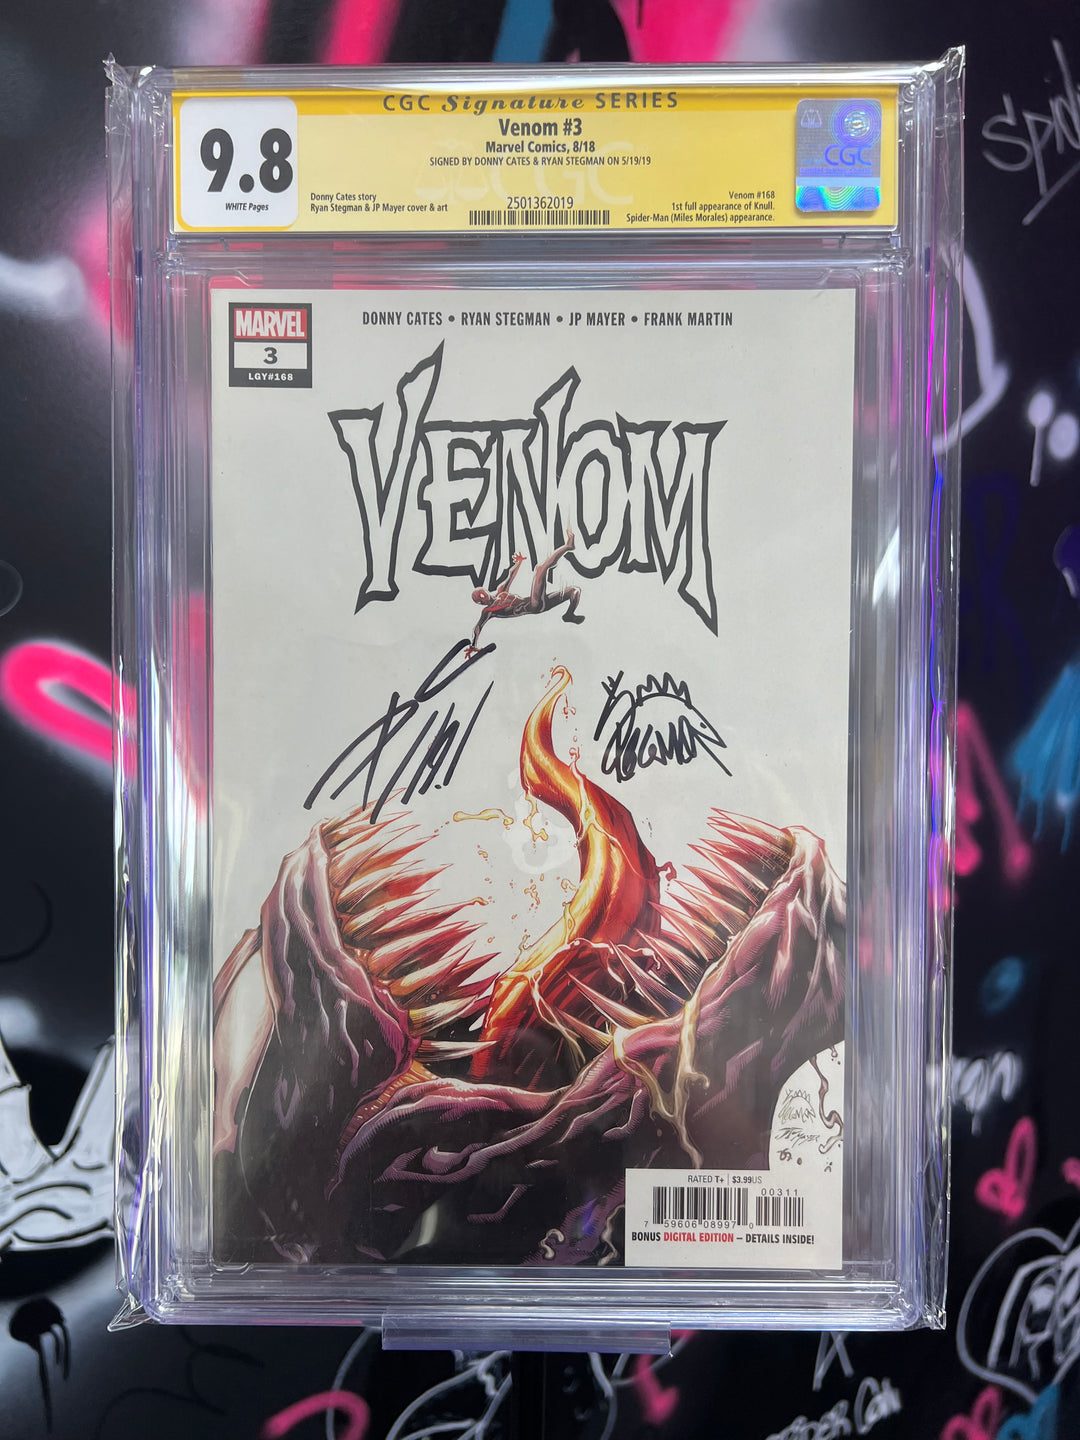 Venom #3 First Printing CGC 9.8 Signed SS Donny Cates and Ryan Stegman